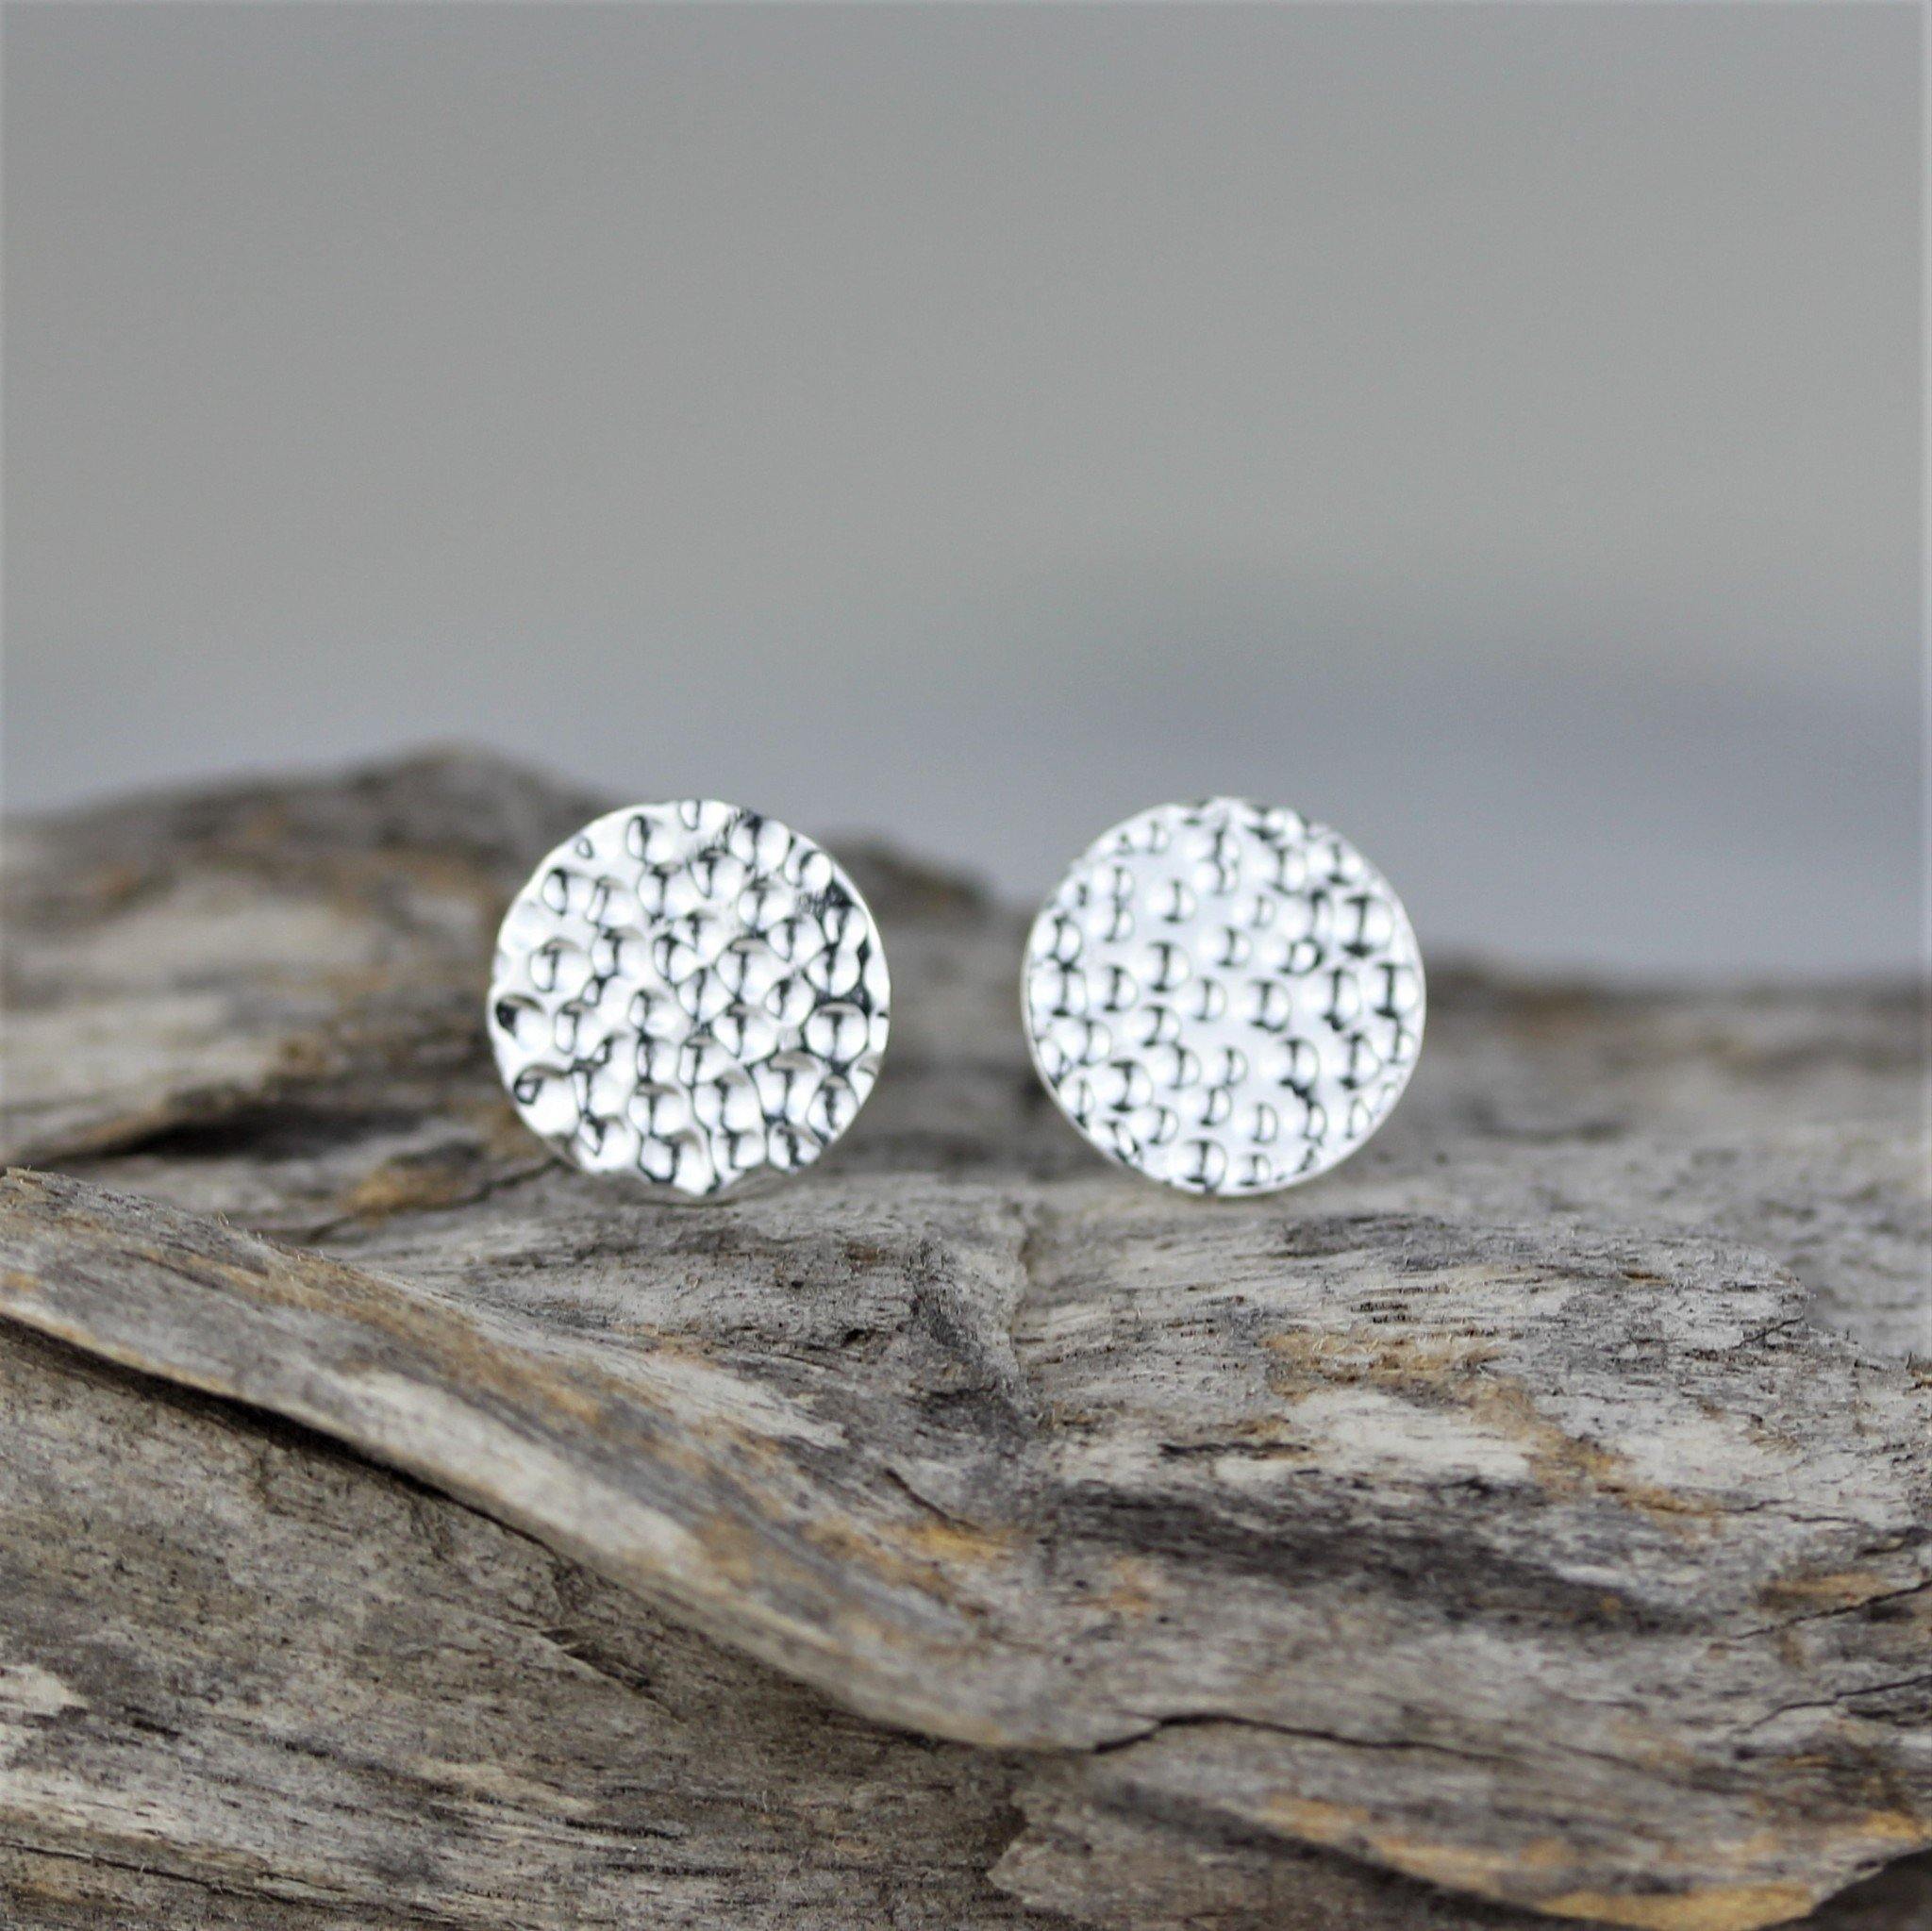 Sterling Silver 10mm Round Hammered Beaten Flat Disc Stud Earrings - STERLING SILVER DESIGNS